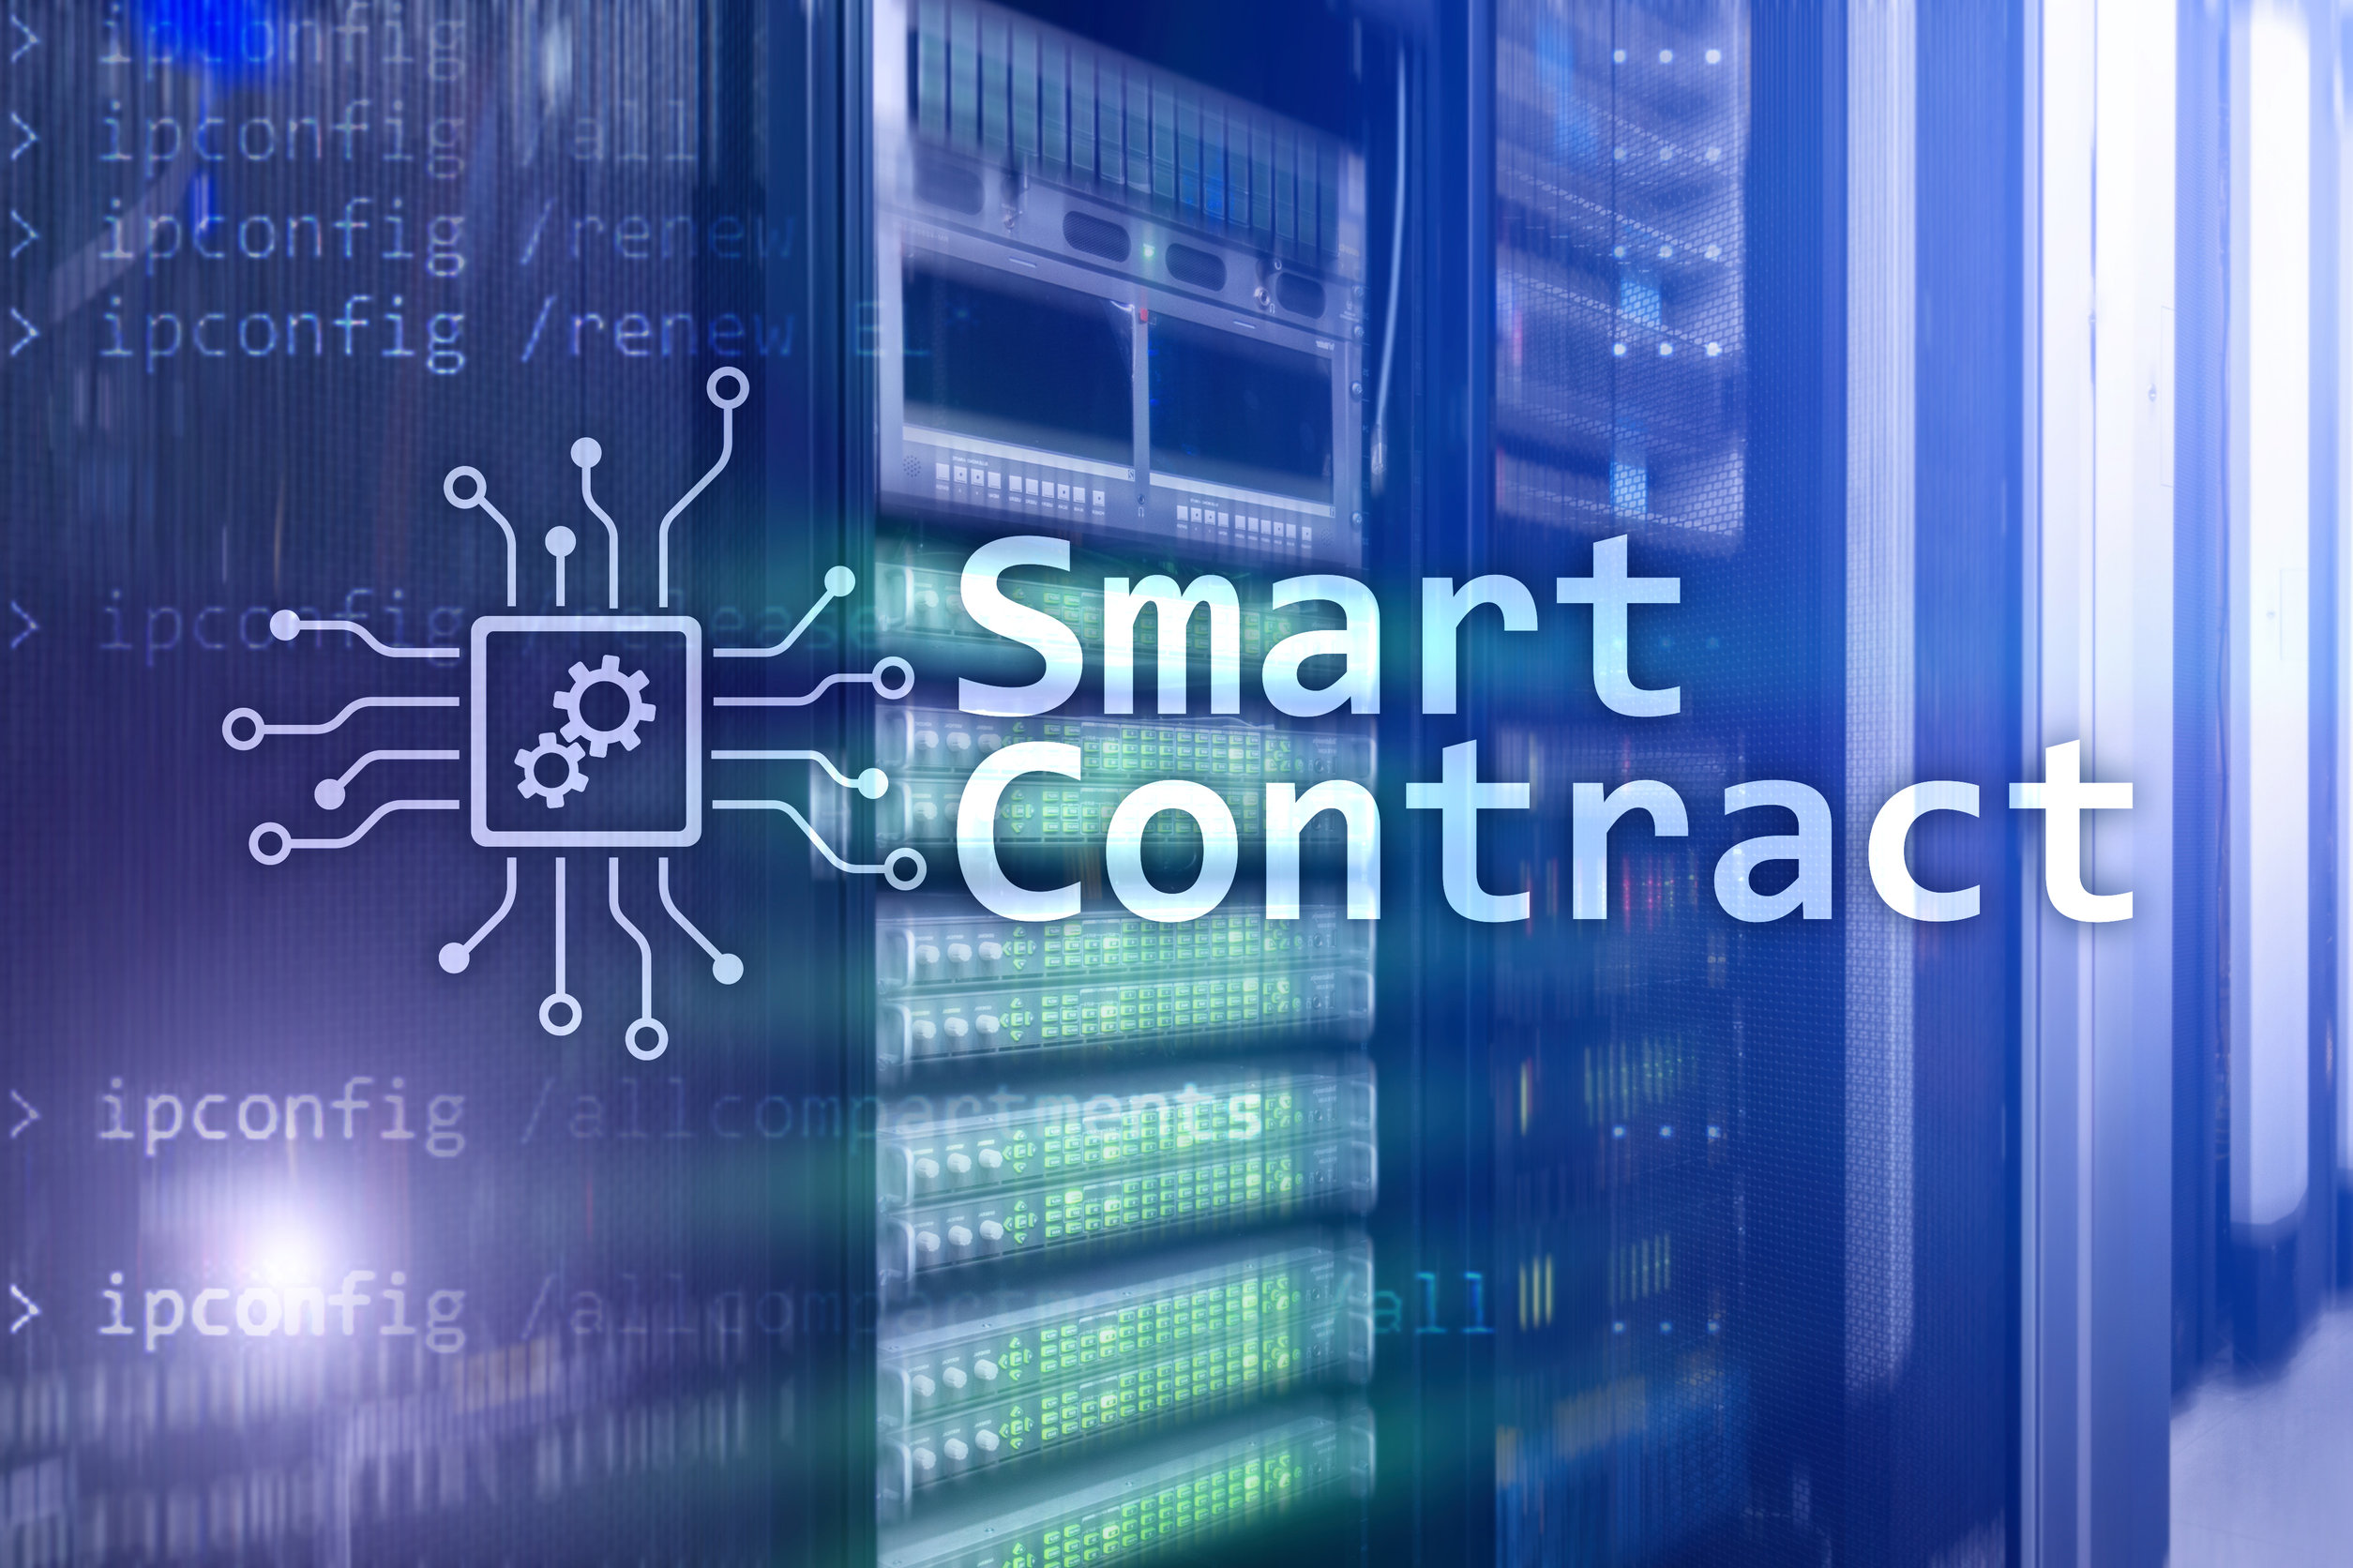 Top smart contract platform tokens worth considering on April 25